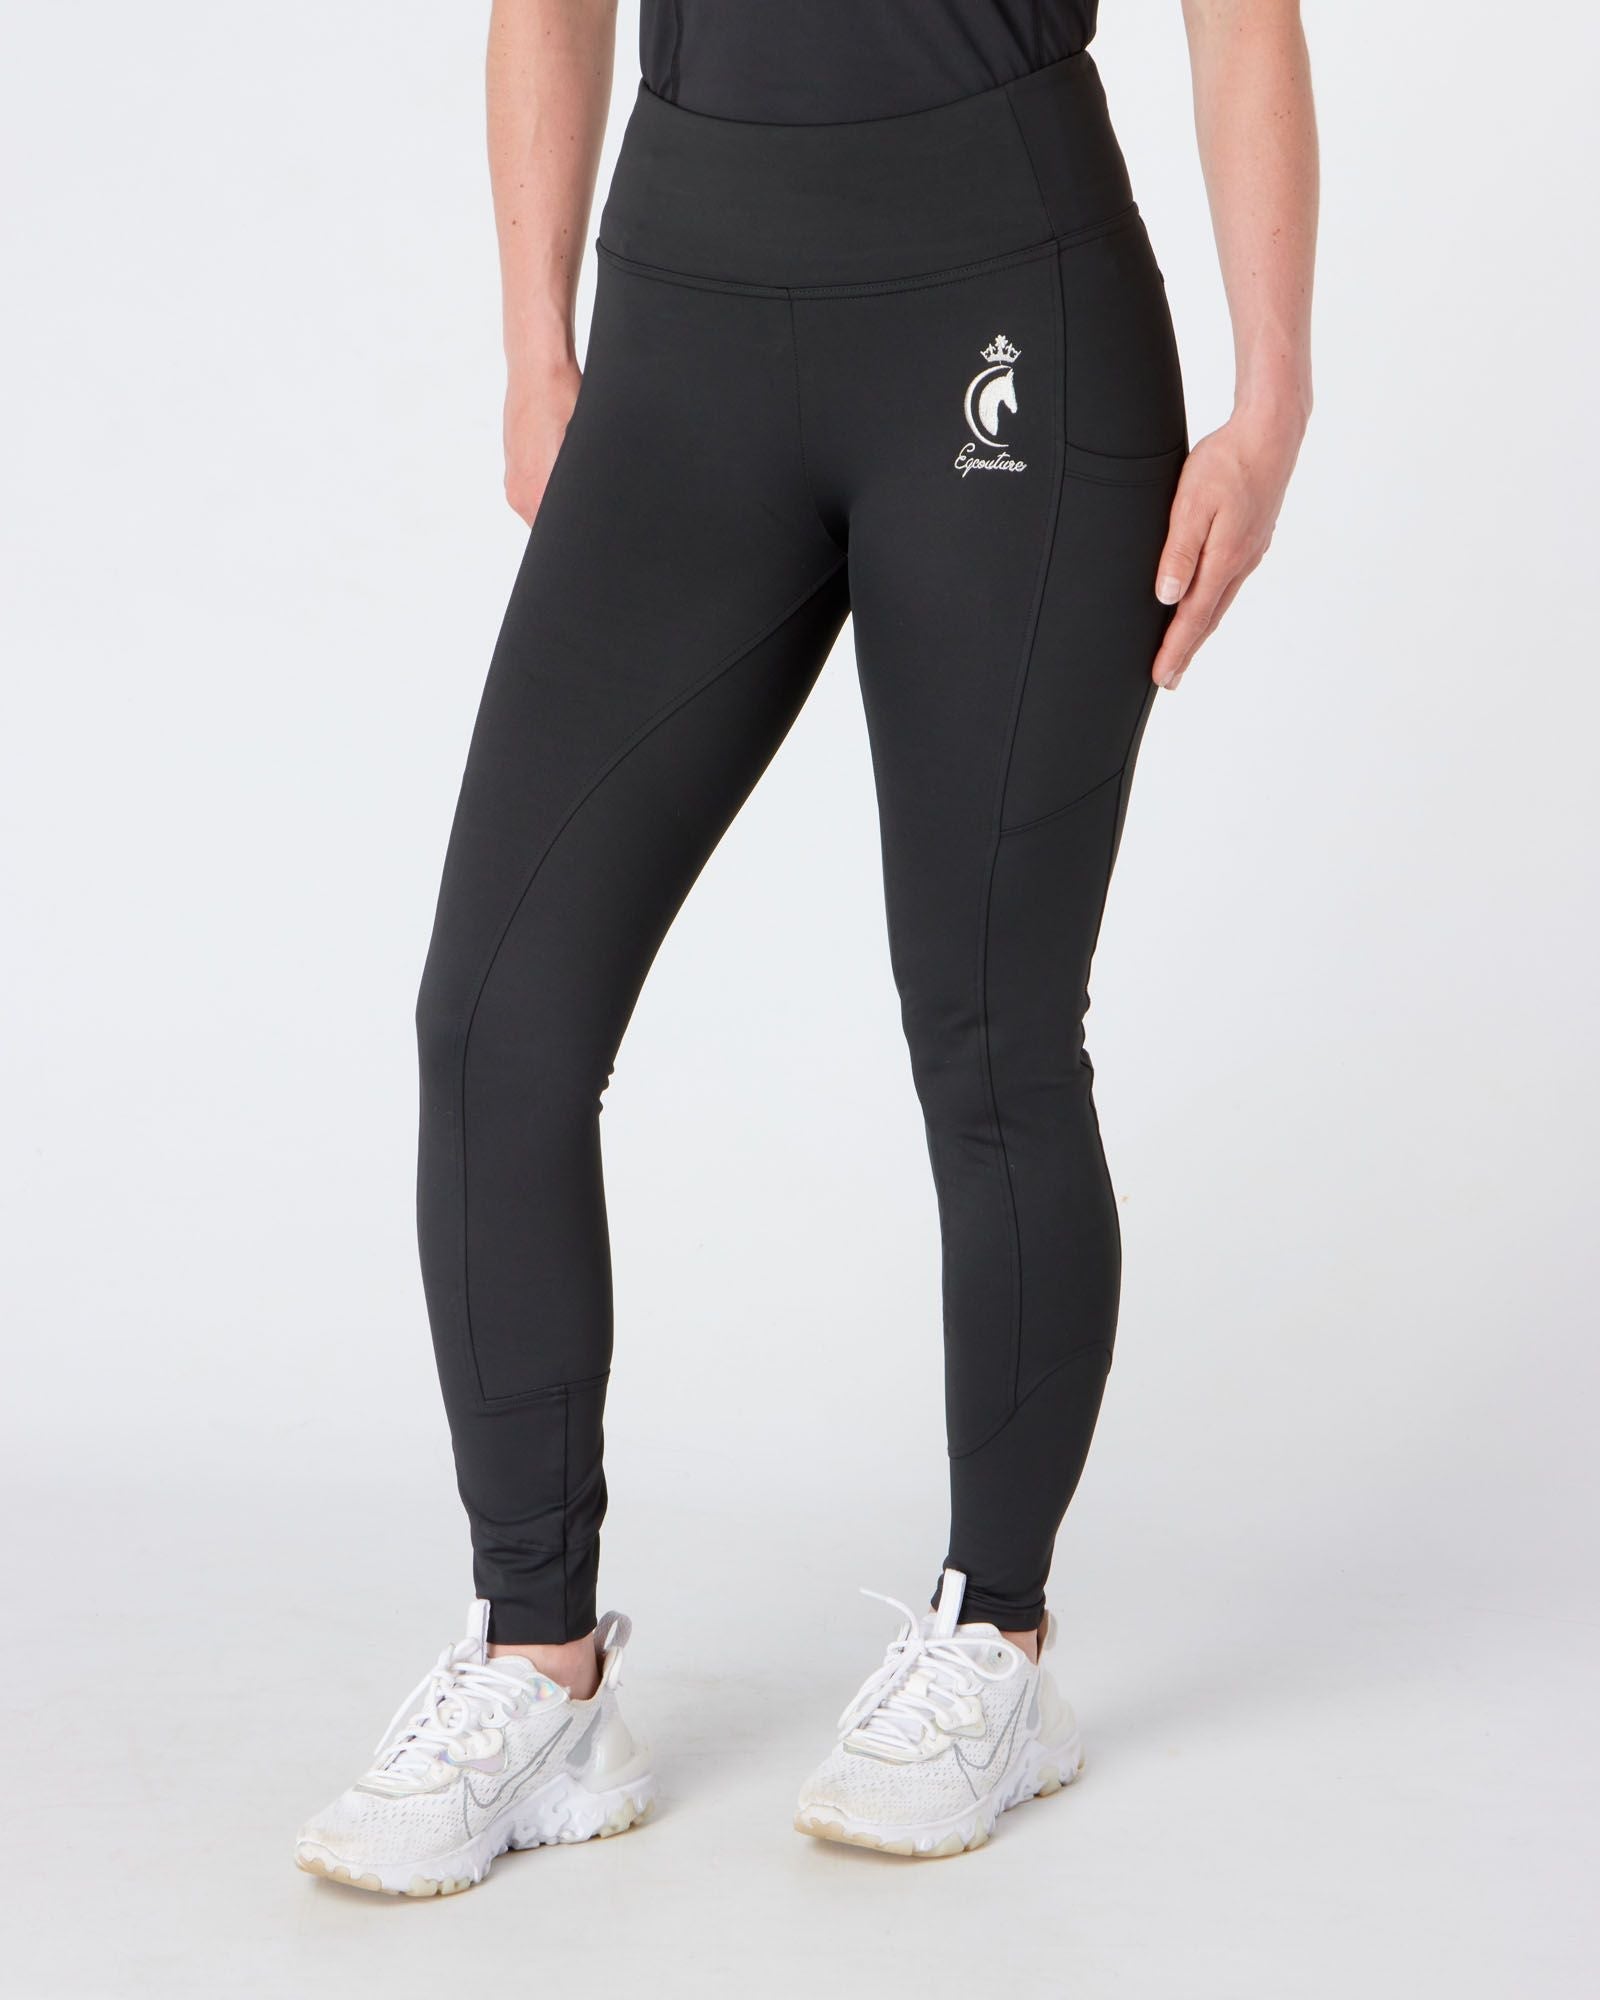 gym sports riding leggings black with phone pockets